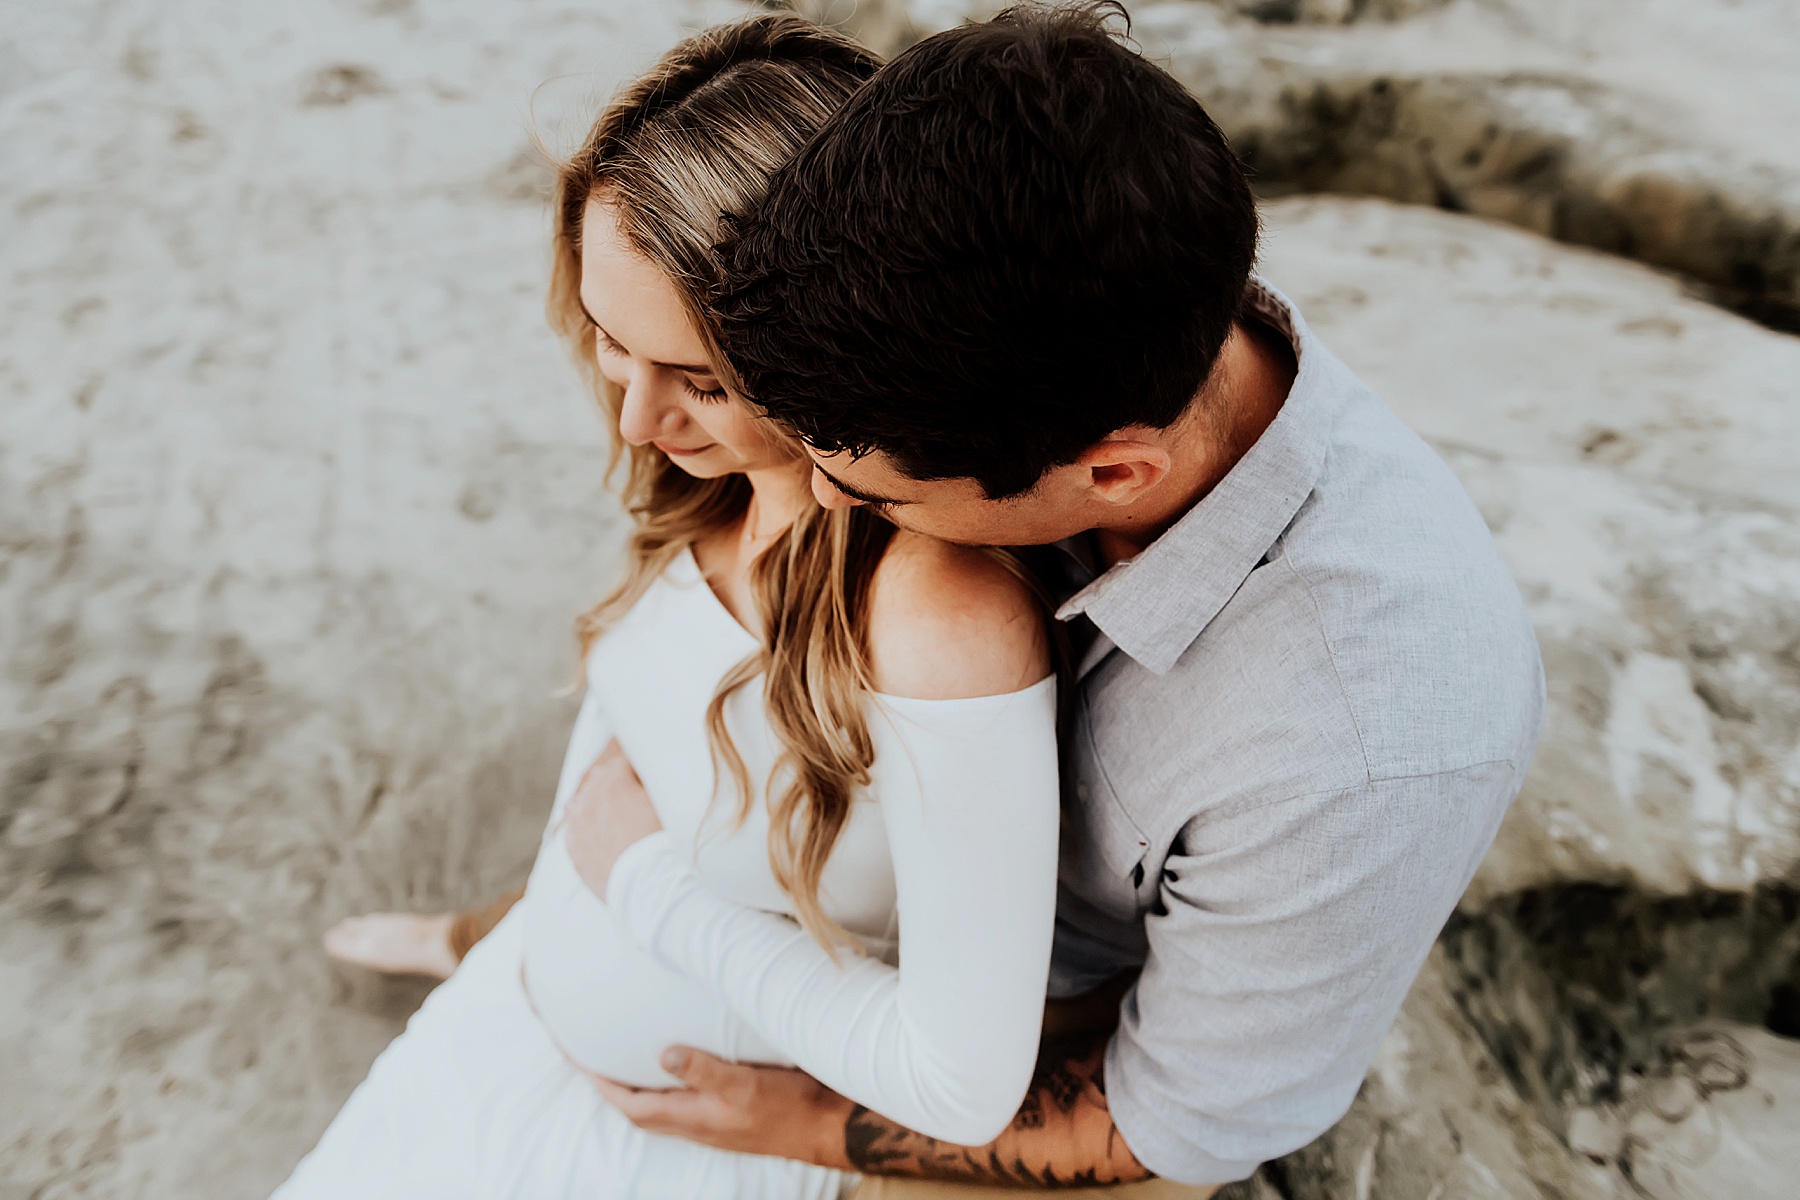 maternity photography del mar couple pose on beach